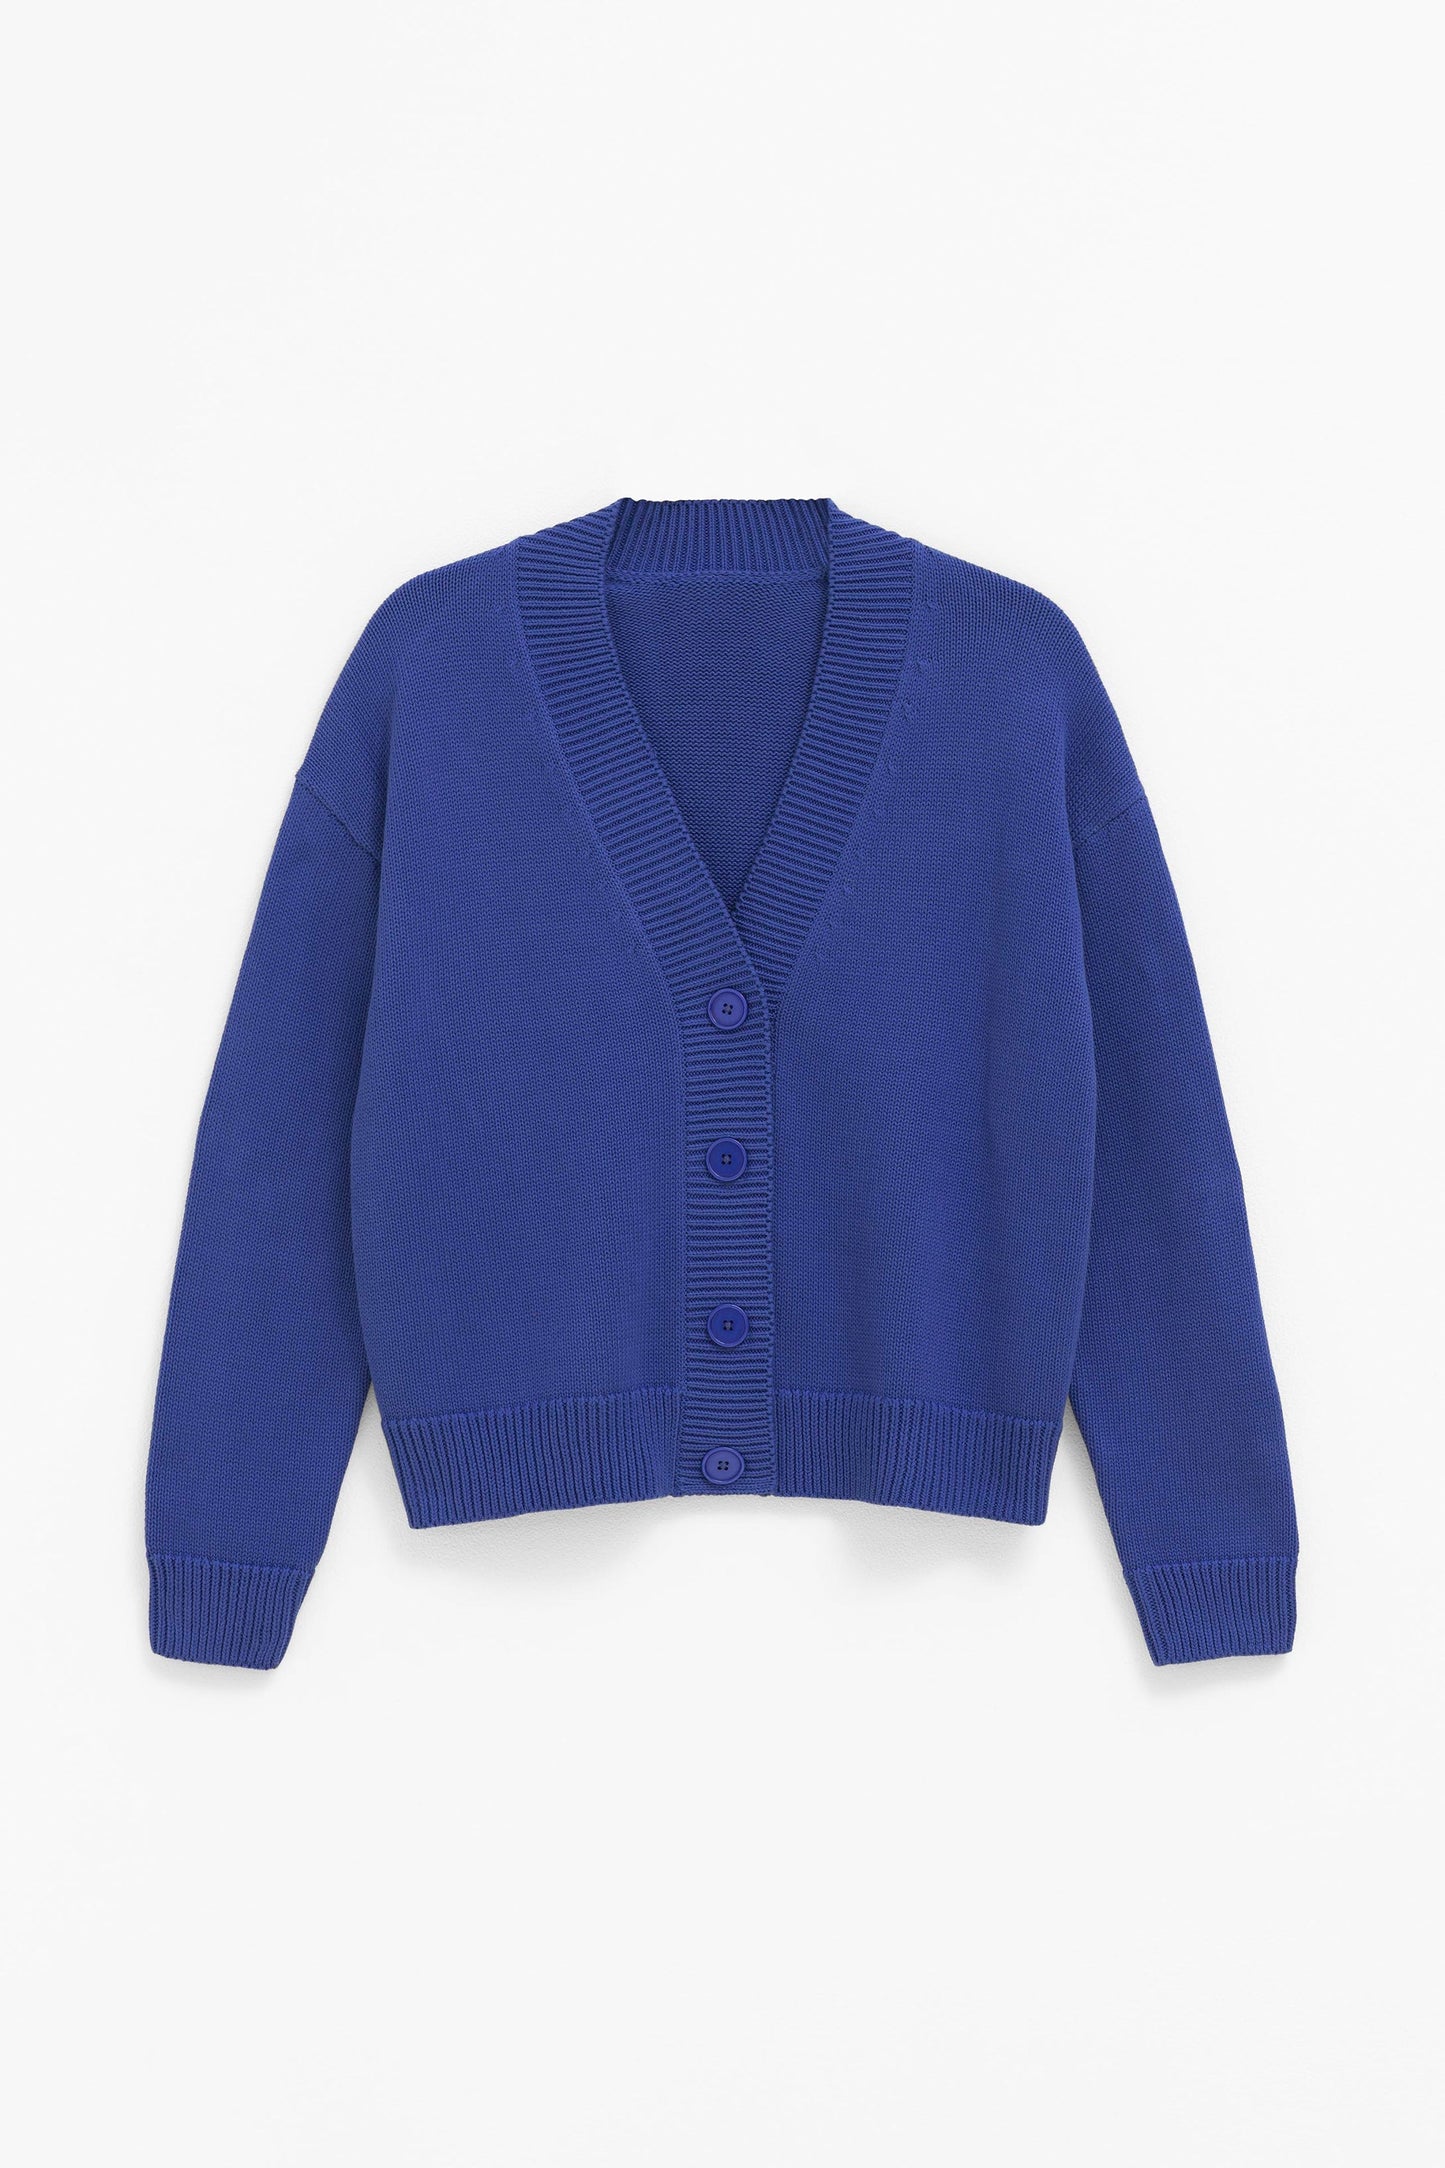 Willow Organic Cotton Everyday Knit Cardigan Front | SEA BLUE